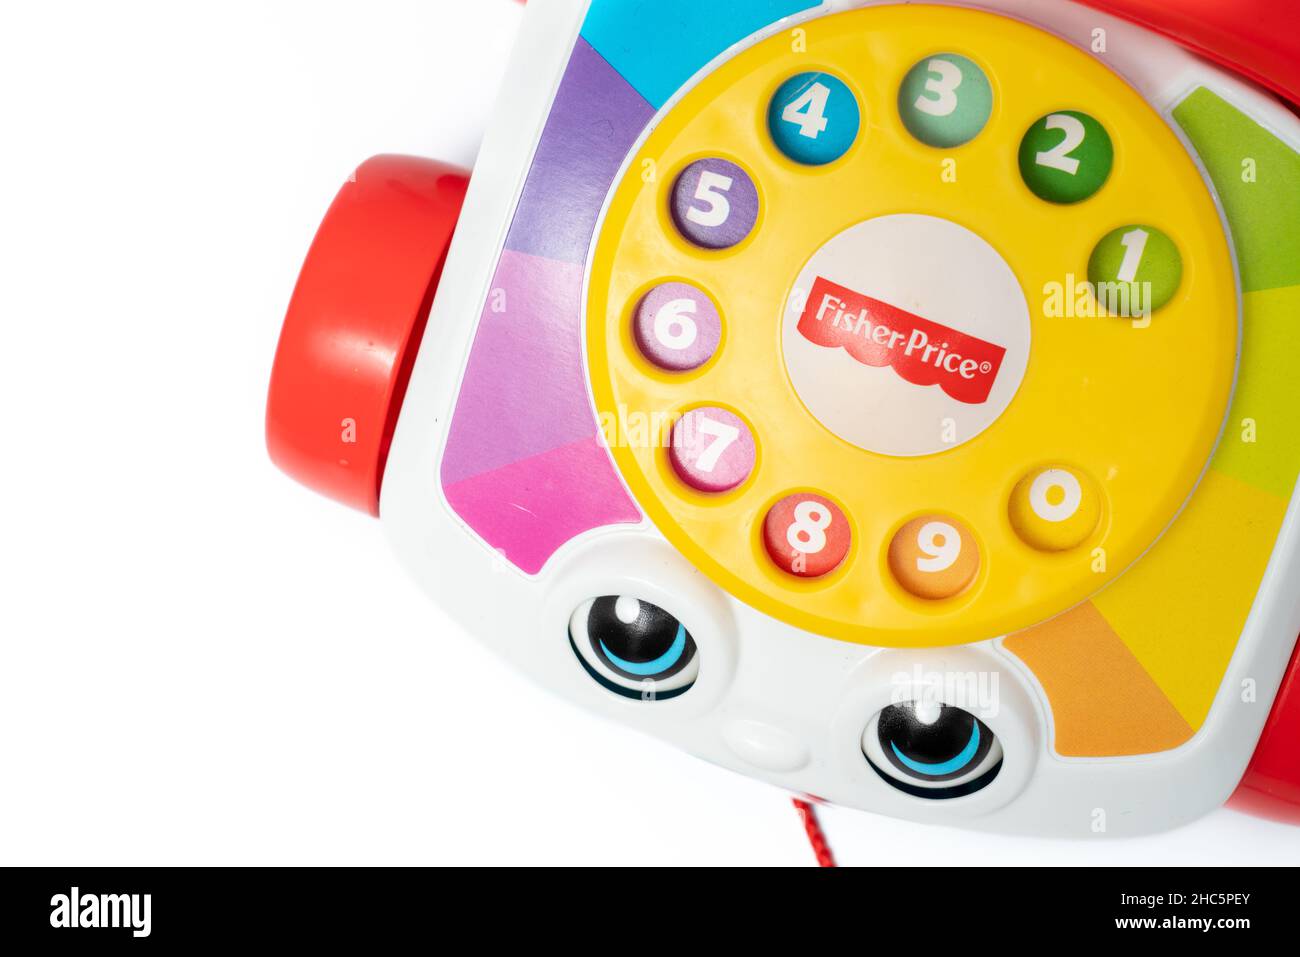 Barcelona, Spain - 12.24.2021: Children's toy landline phone with a red receiver, a dial and a smile on the body made by Fisher-Price isolated on whit Stock Photo